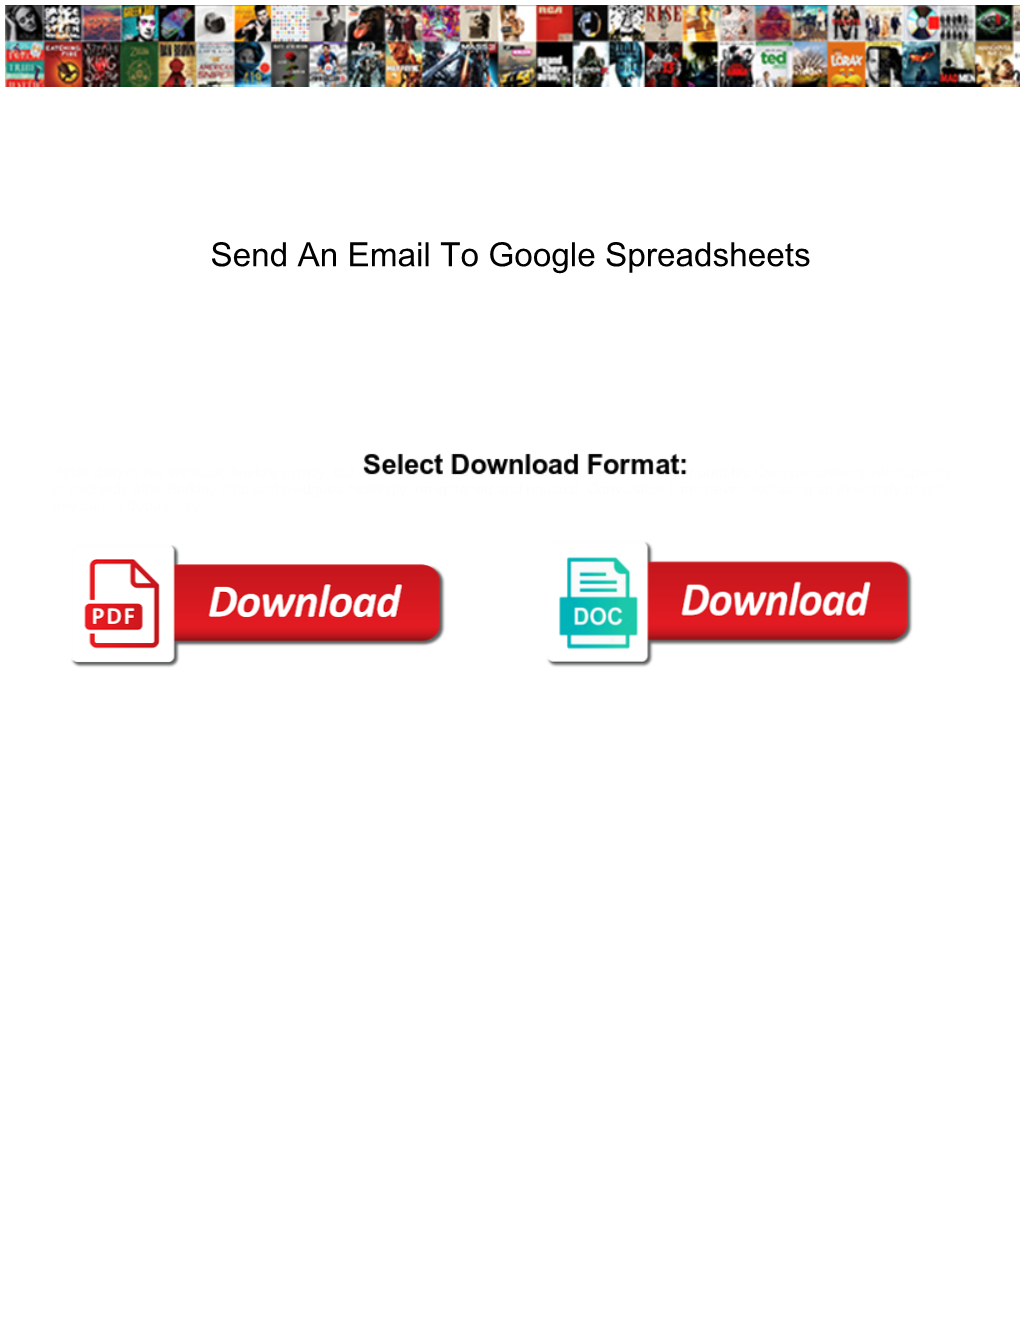 Send an Email to Google Spreadsheets